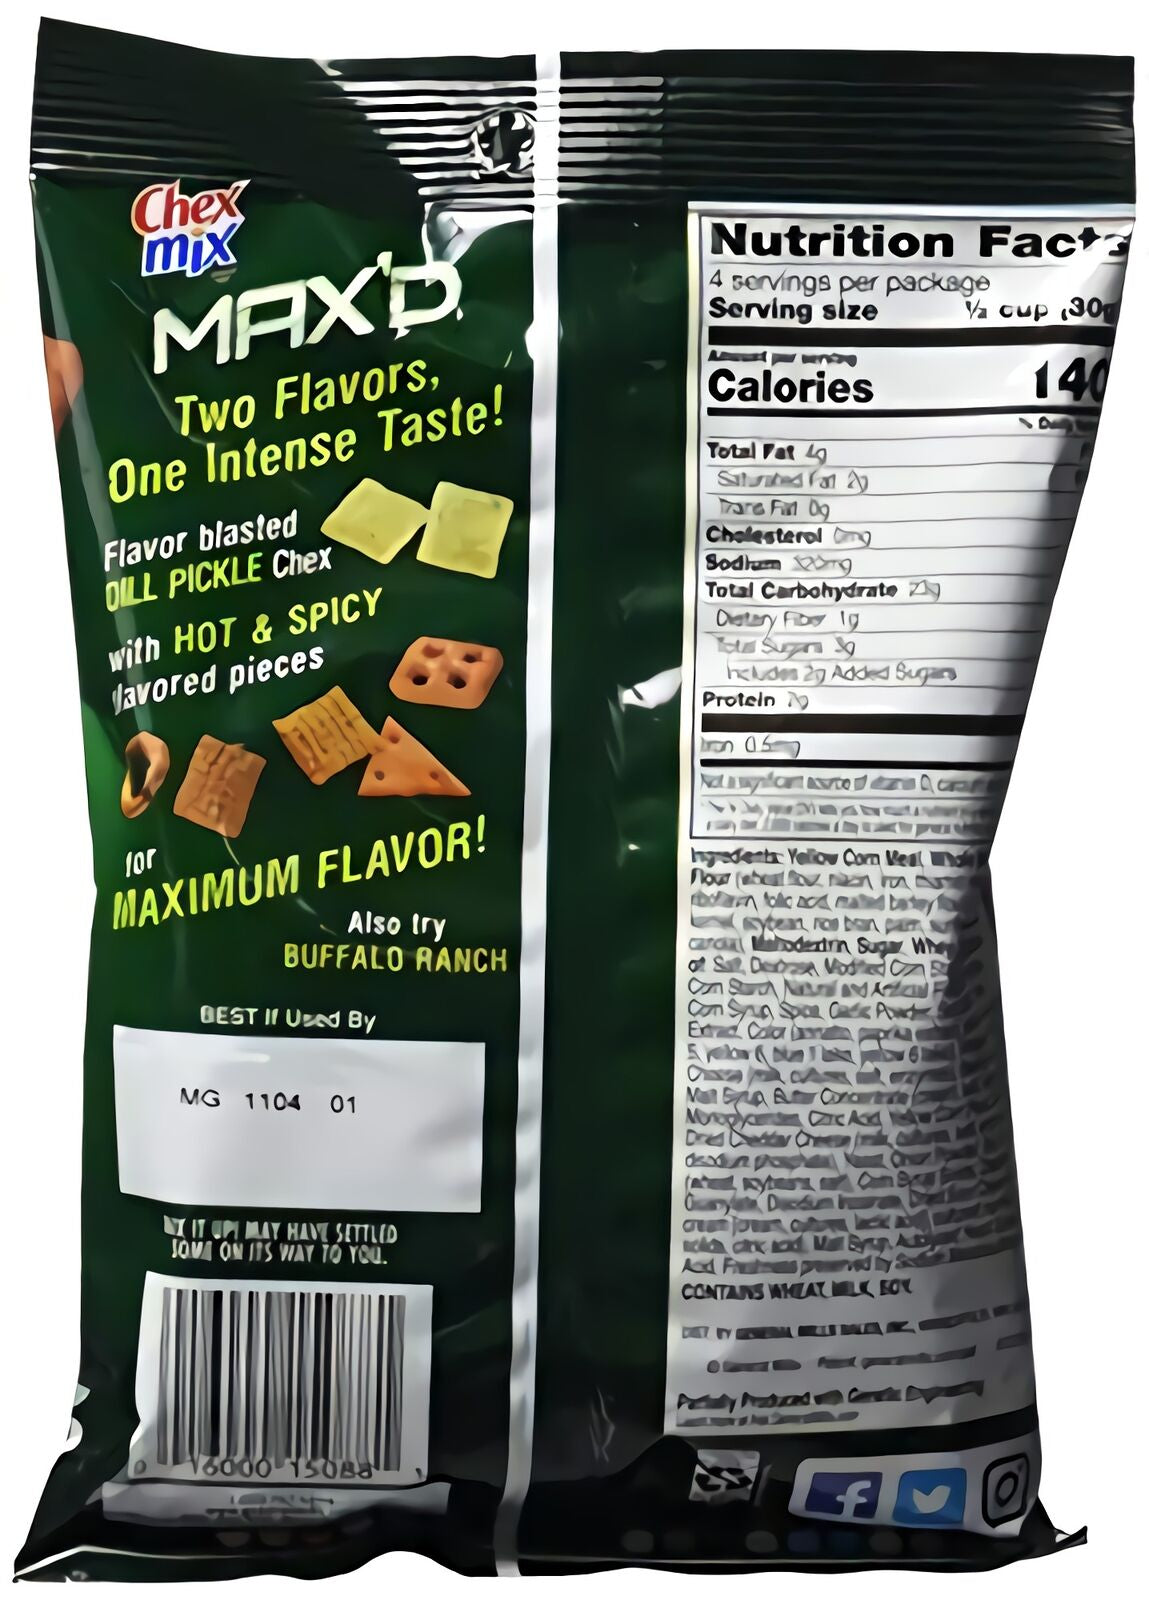 Chex Mix MAX'D Spicy Dill, 4.25 Oz (Pack of 8)